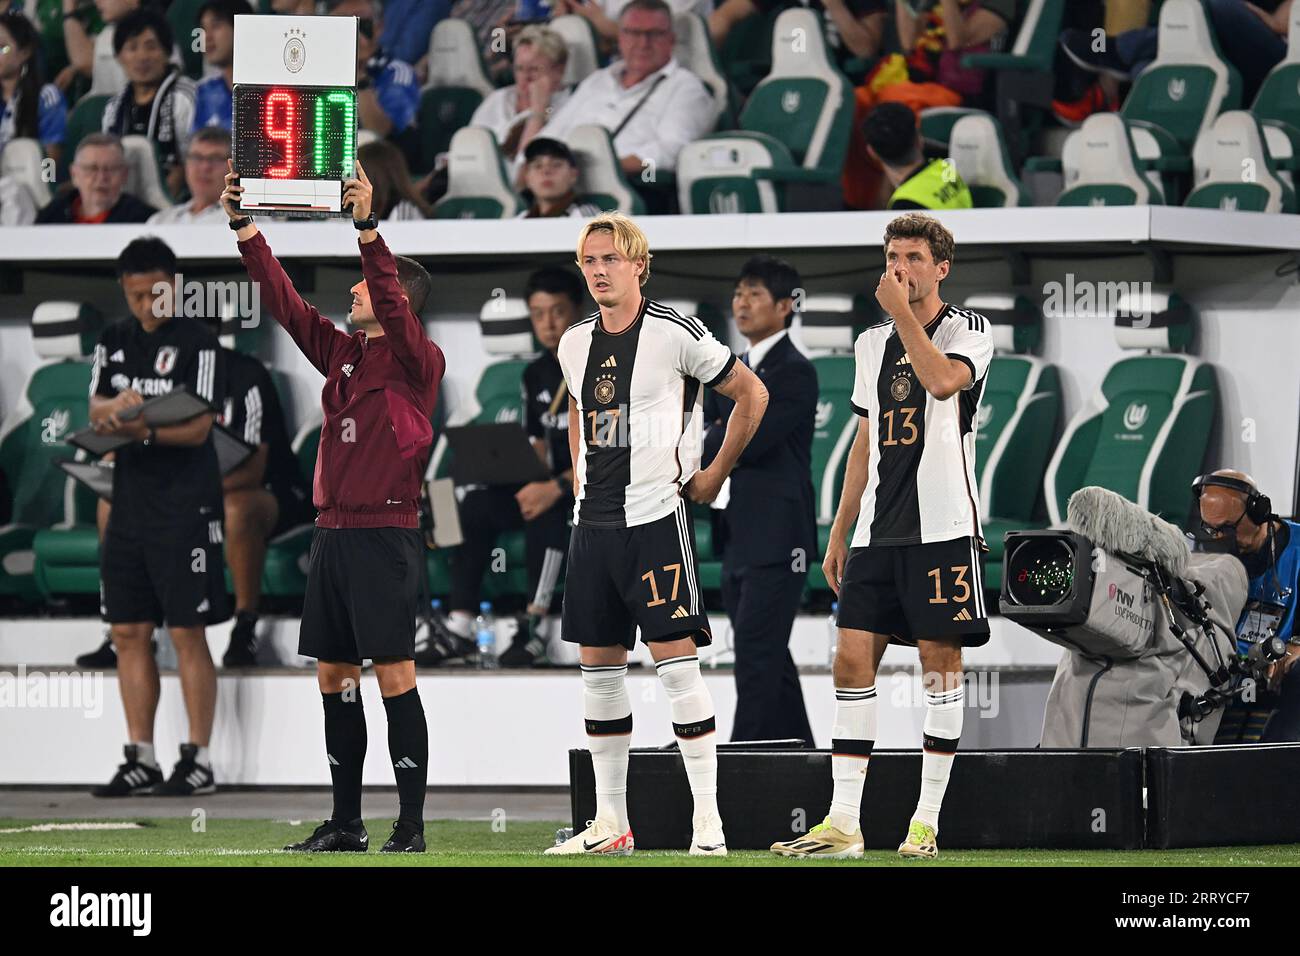 WOLFSBURG - (l-r), Julian Brandt of Germany, Thomas Muller of Germany during the friendly Interland match between Germany and Japan at the Volkswagen Arena on September 9, 2023 in Wolfsburg, Germany. ANP | Hollandse Hoogte | GERRIT VAN COLOGNE Stock Photo